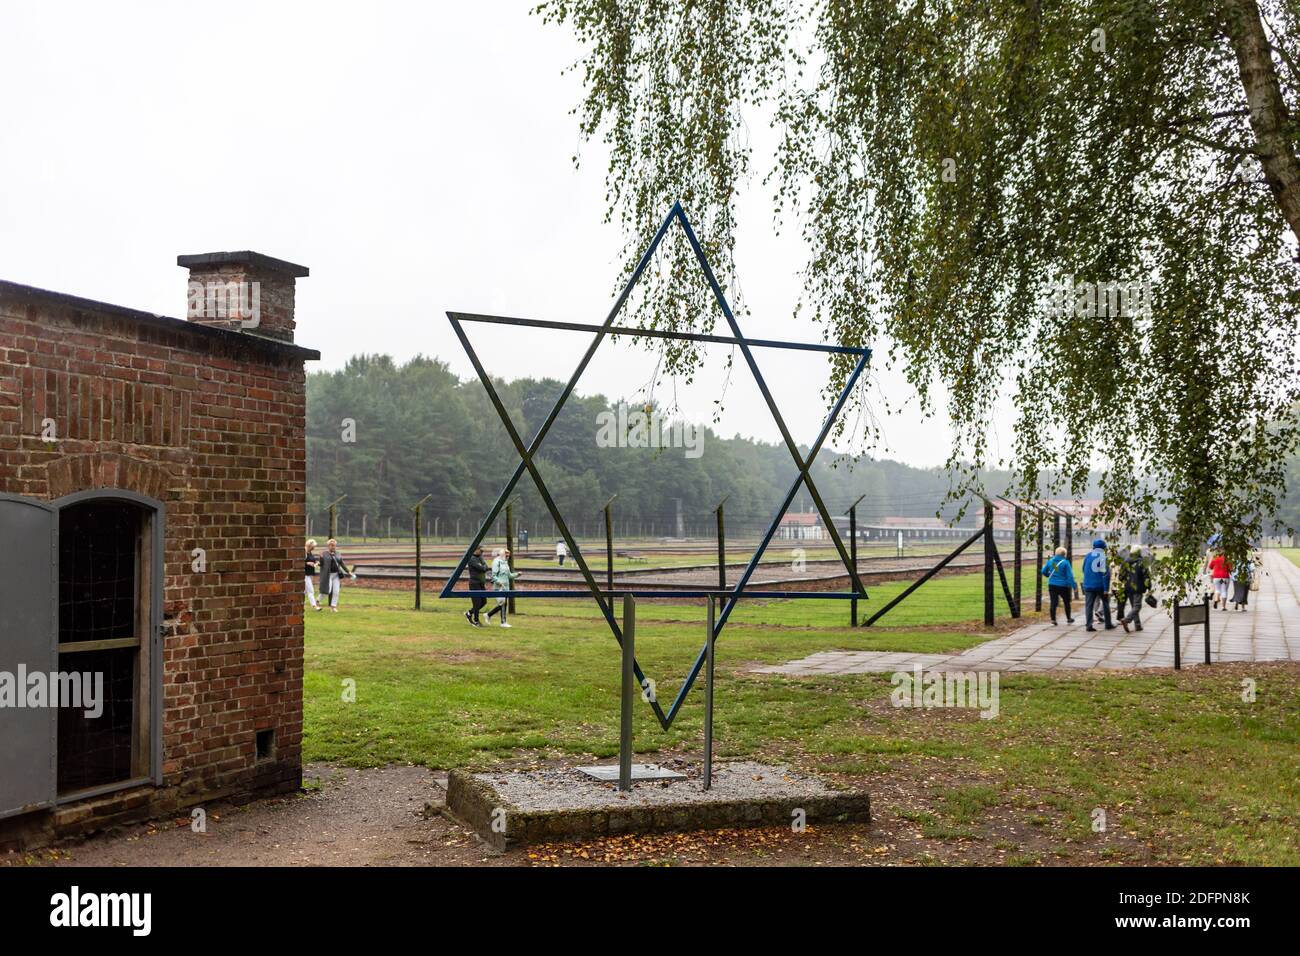 Sztutowo, Poland - Sept 5, 2020: The symbolic Star of David next to the Gas Chamber at the former Nazi Germany Concentration Camp, Stutthof, Poland Stock Photo